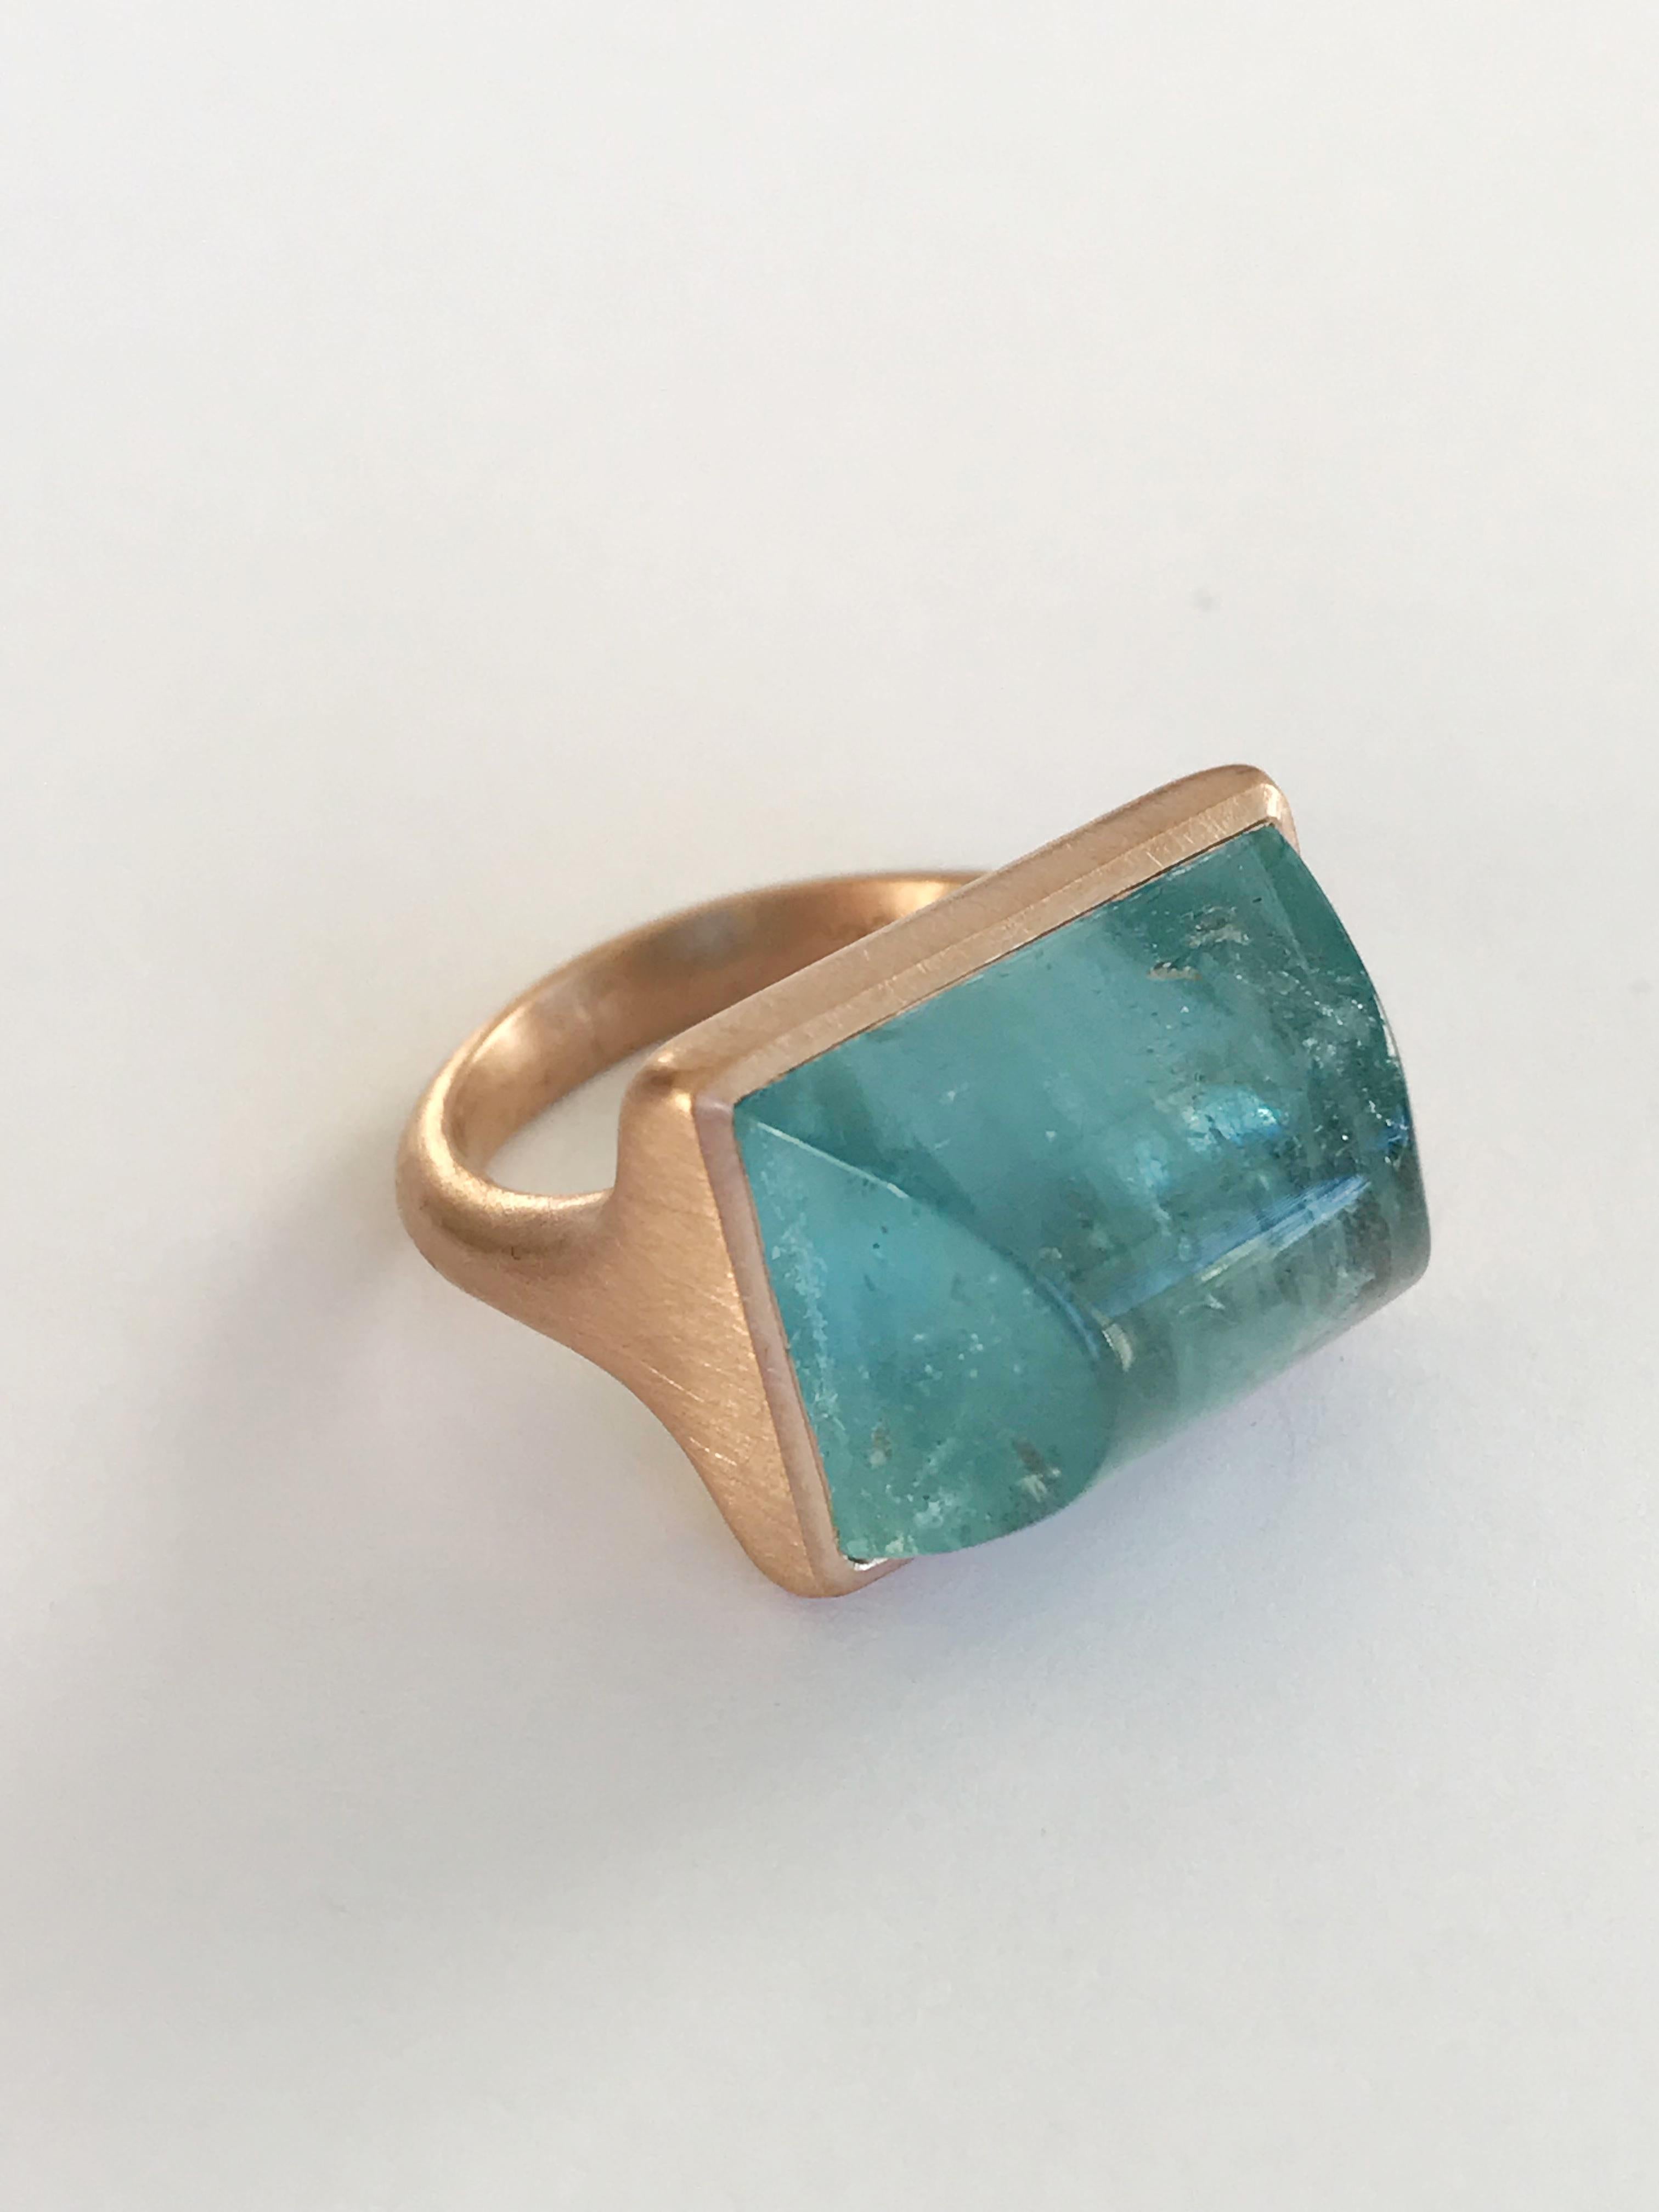 Dalben design One of a kind 18 kt rose gold matte finishing ring with a 17,05 carat bezel-set  rectangular cabochon Aquamarine  .  

Ring size 7 1/4 - EU 55 re-sizable to most finger sizes.  
Bezel setting dimension:  
width 18,9 mm,  
height 14,4